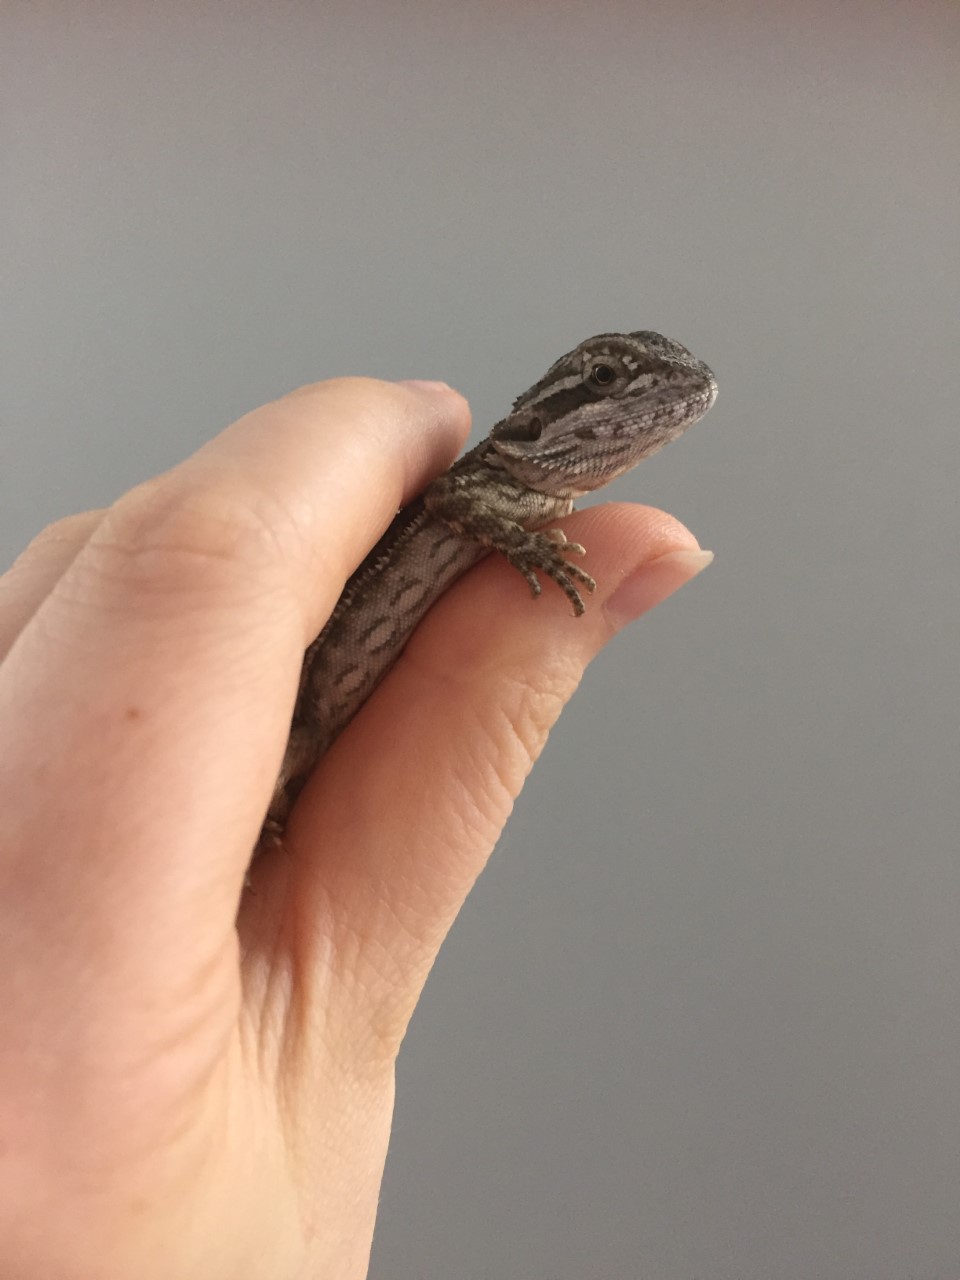 This tiny lizard is being a champ while restrained for his physical examination.  